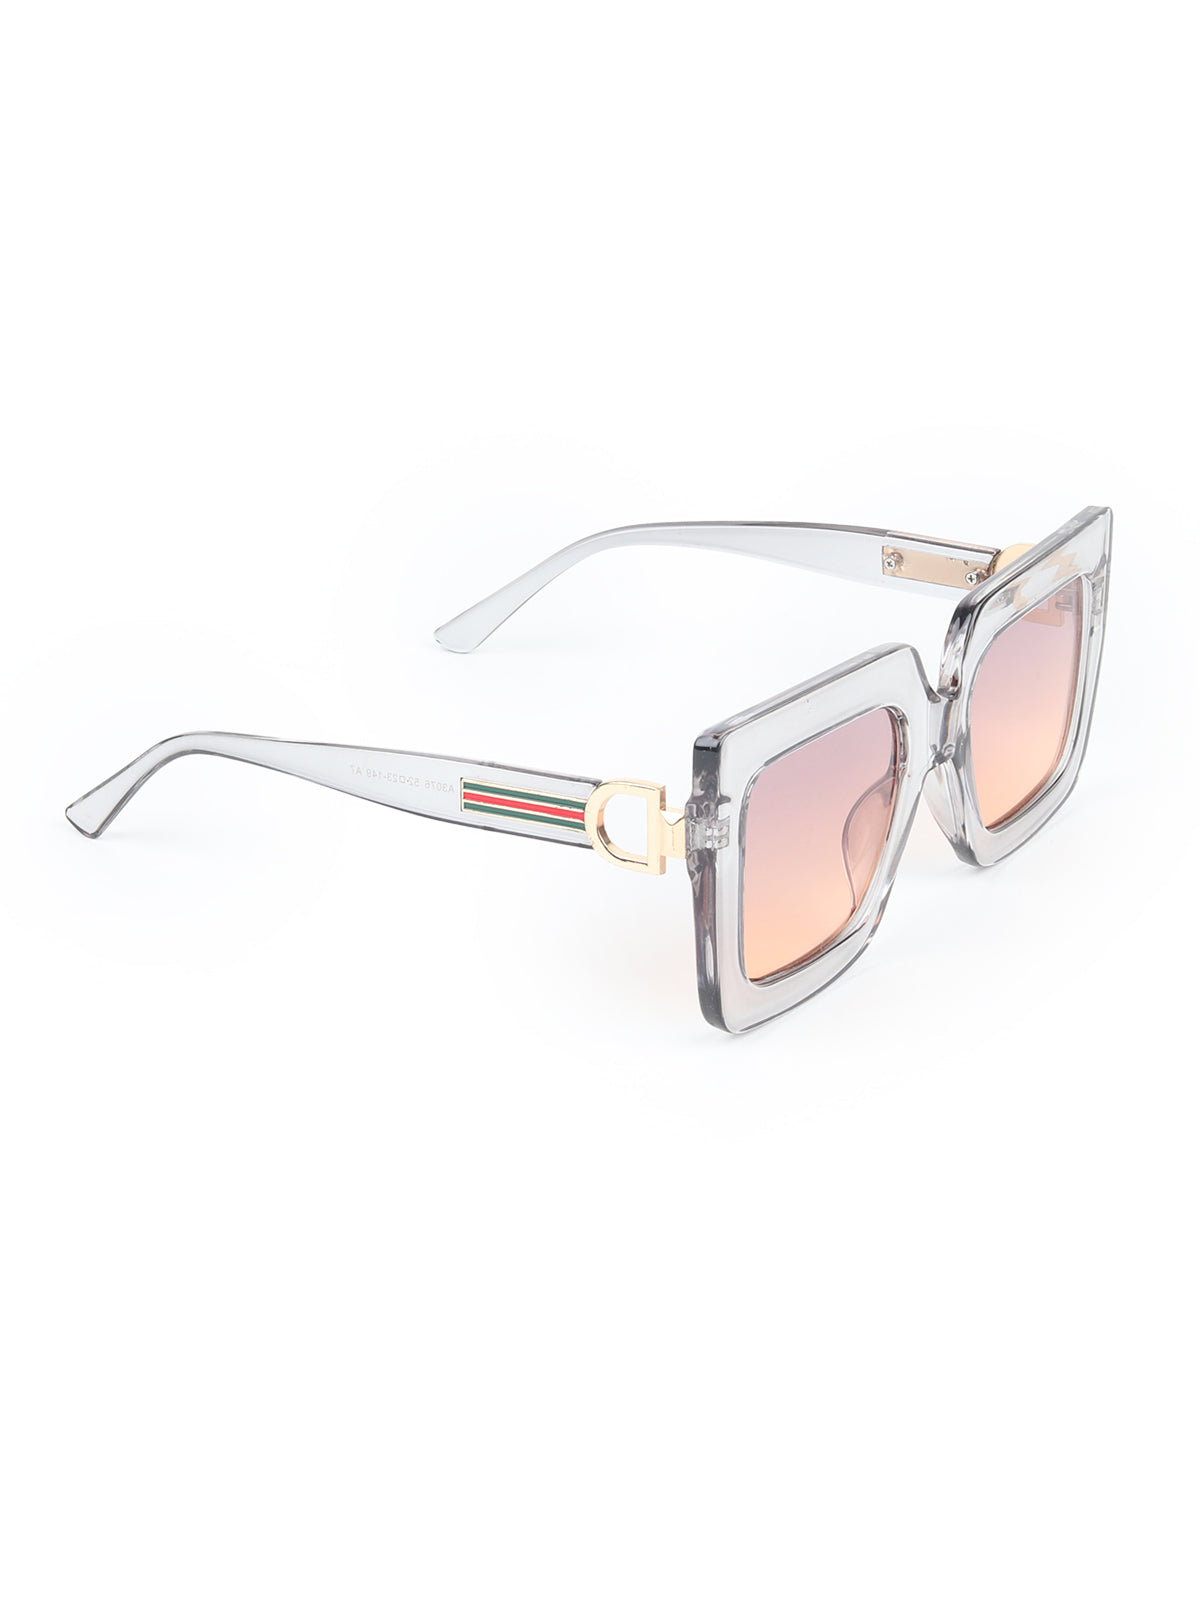 Odette Grey and Tan Acrylic Oversized Sunglasses for Women